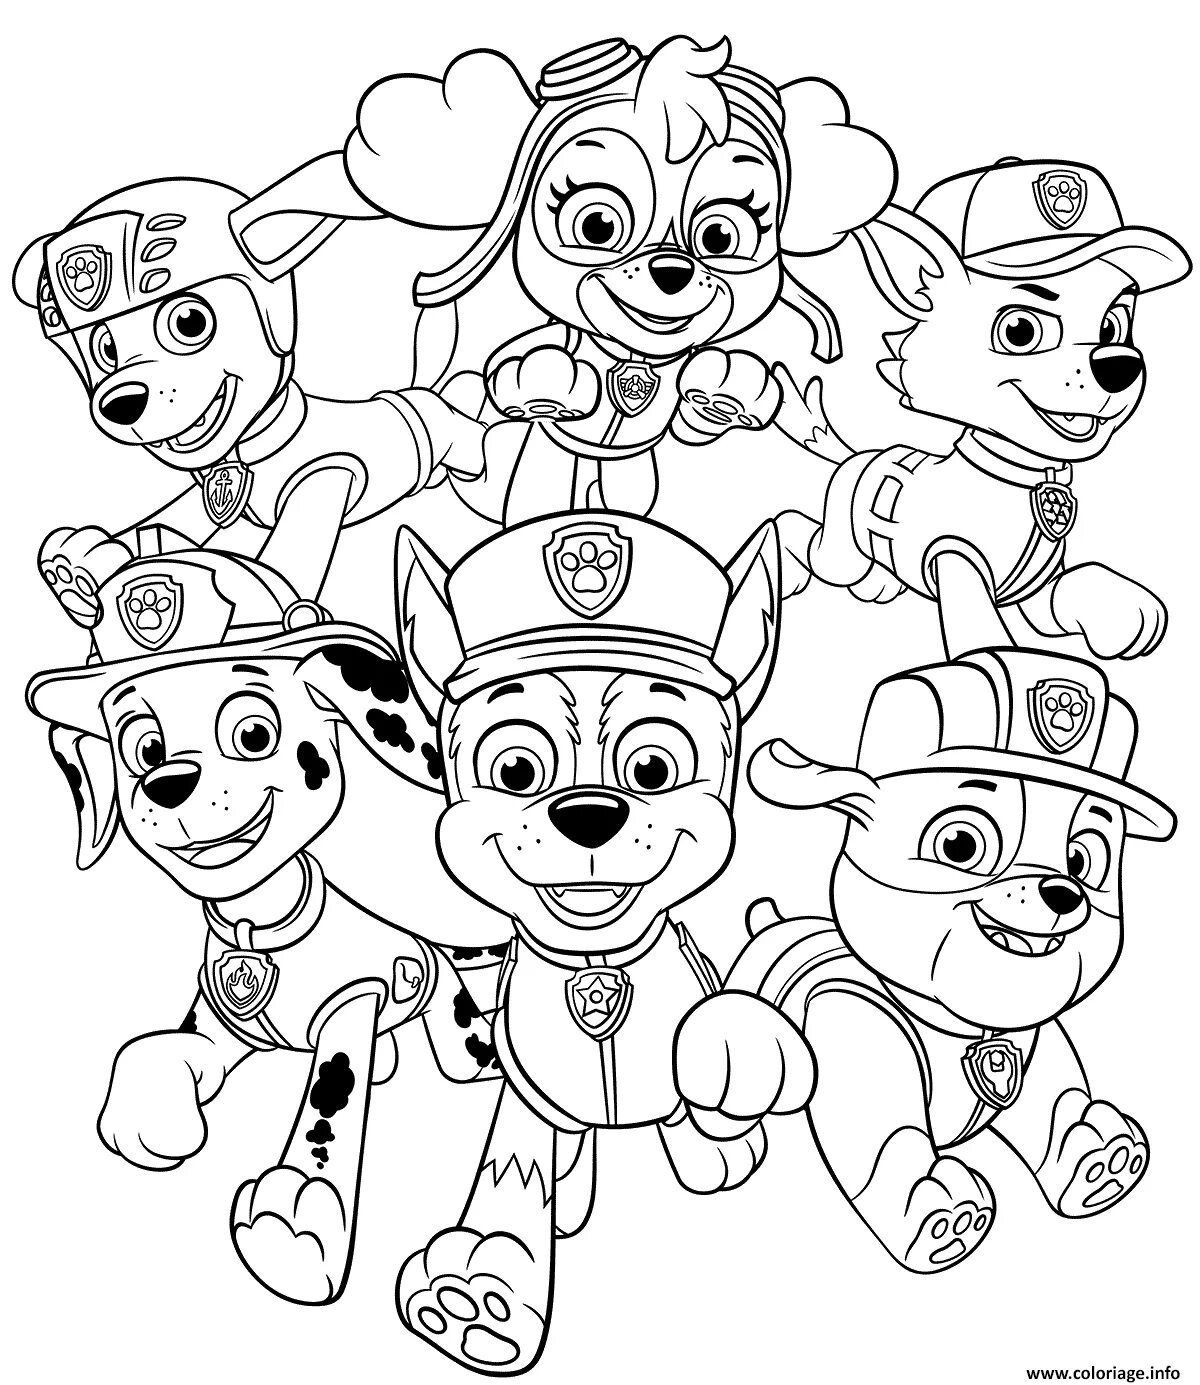 Marshal's creative coloring book for kids